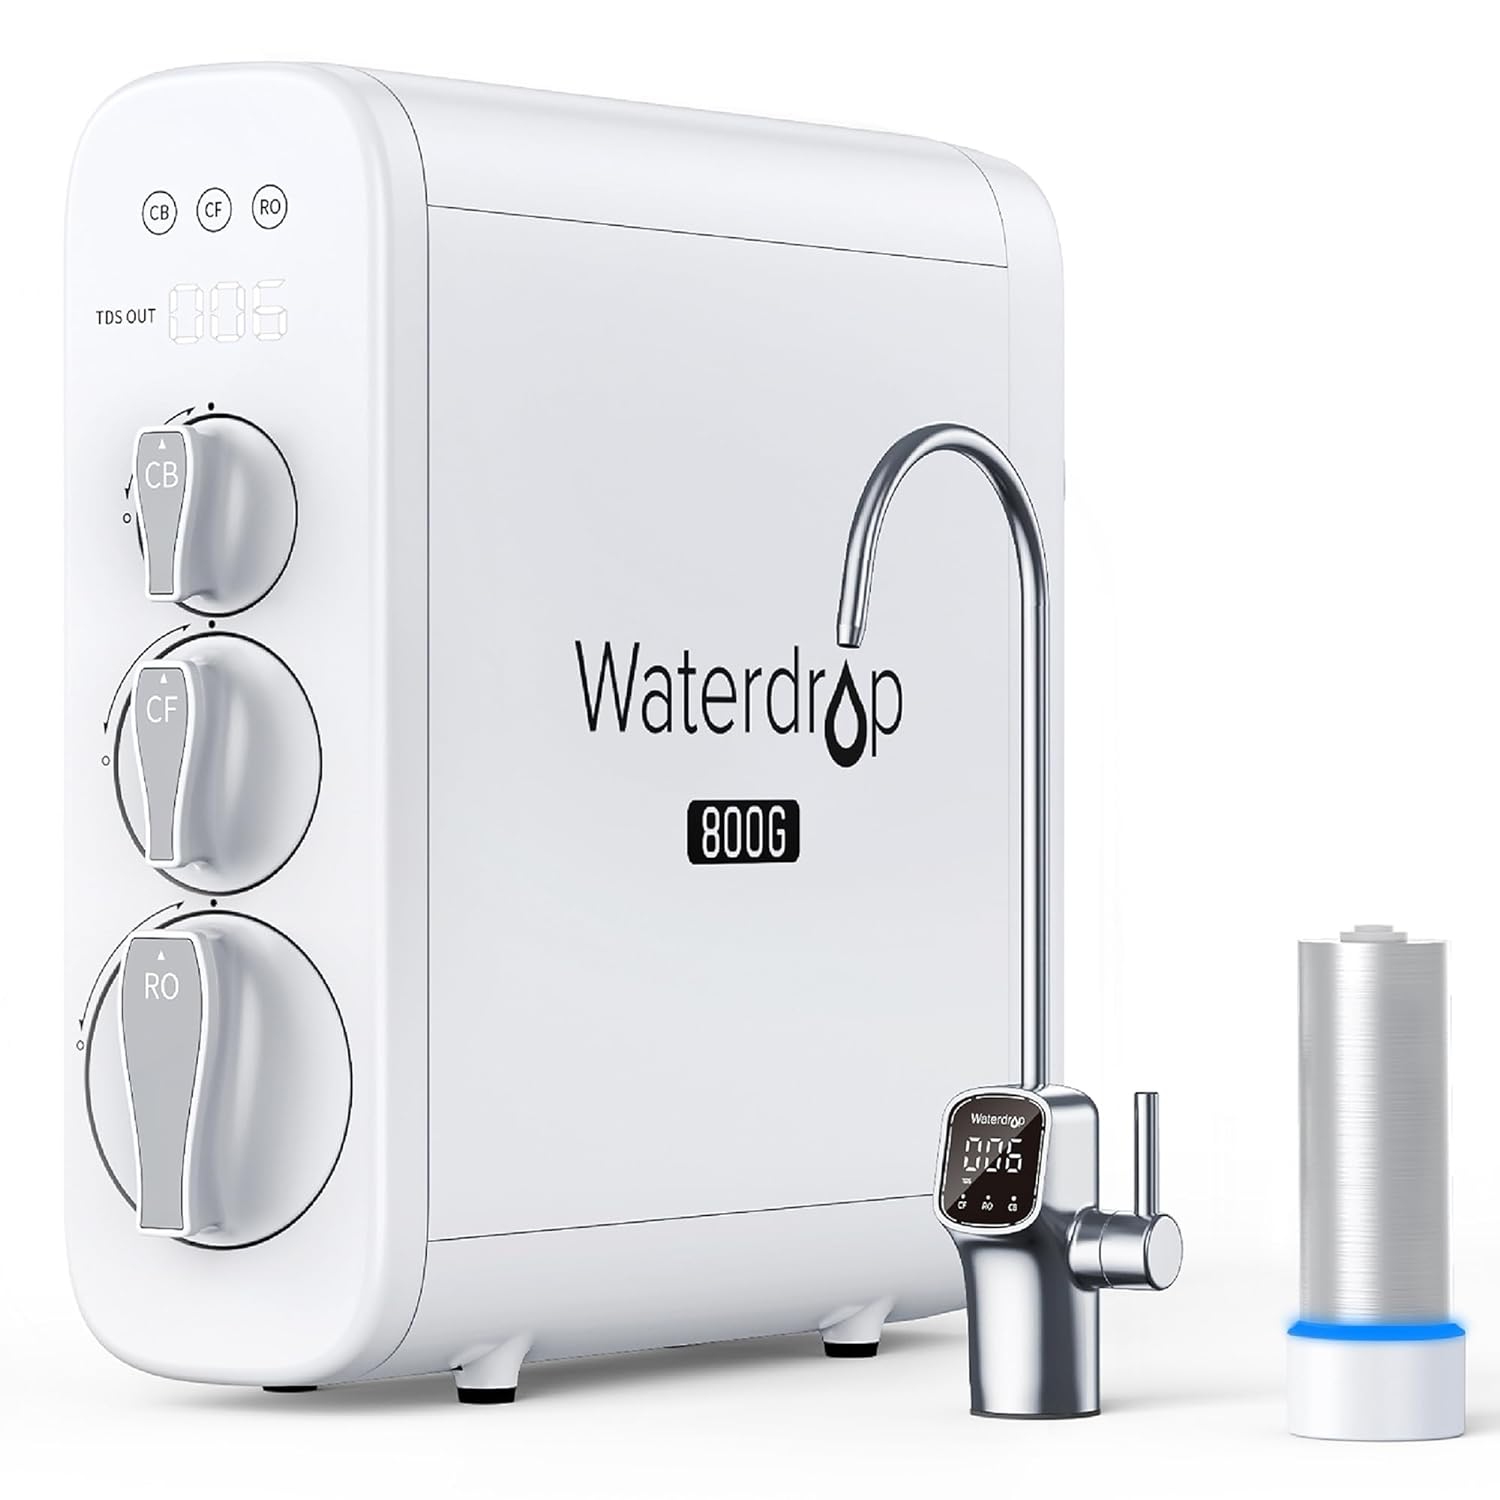 Waterdrop G3P800 Reverse Osmosis System, 800 GPD Fast Flow, NSF/ANSI 42 & 58 & 372 Certified, 3:1 Pure to Drain, LED Purifier